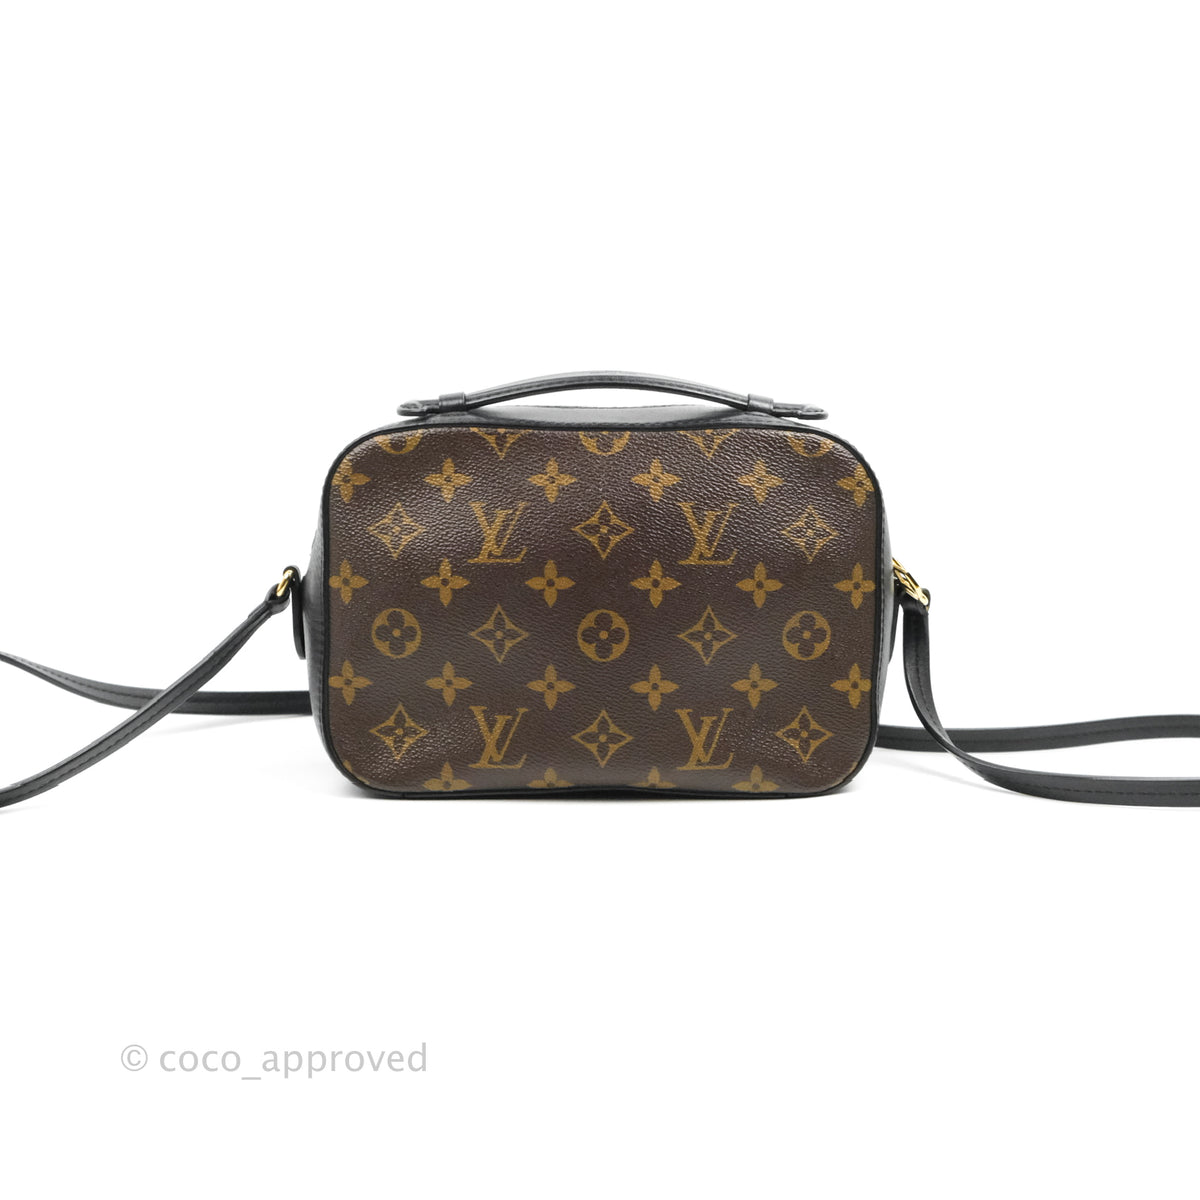 Sold at Auction: LOUIS VUITTON - SMALL MONOGRAM CROSSBODY CAMERA BAG